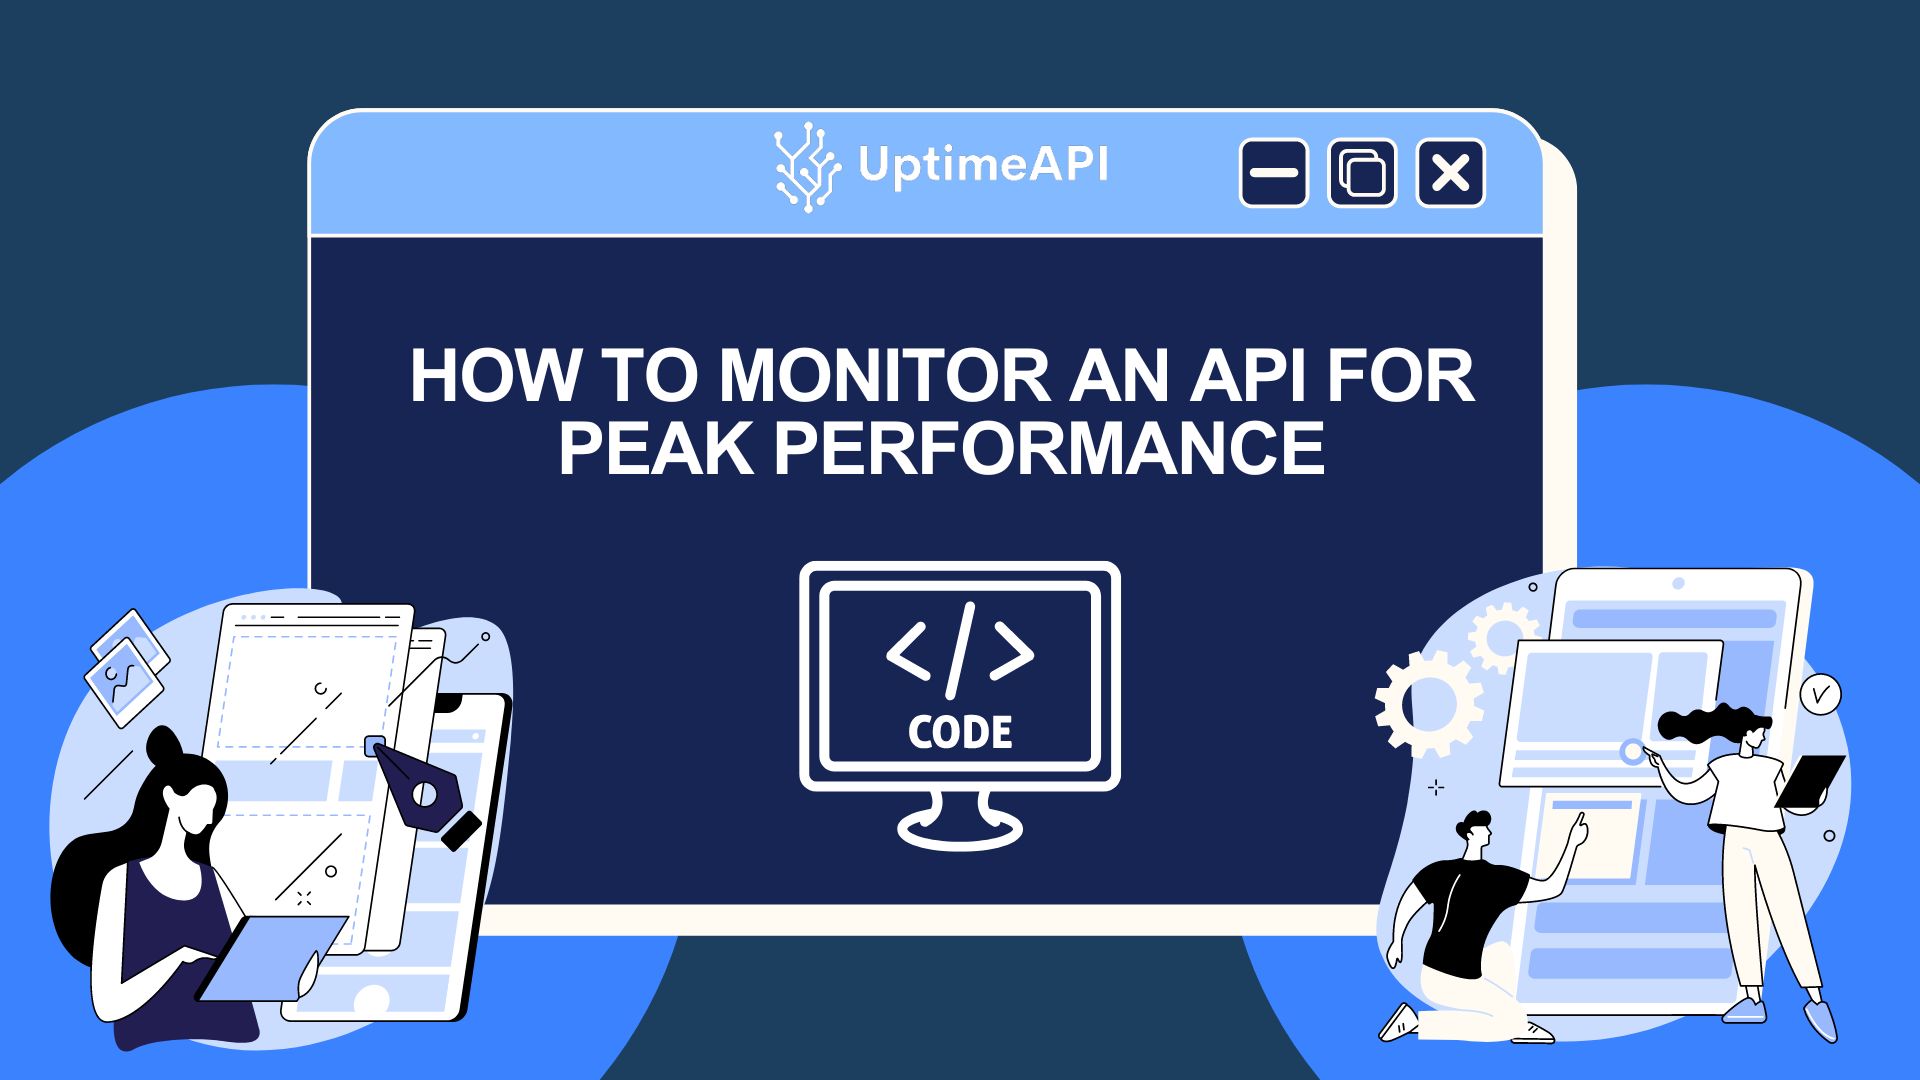 How To Monitor An API For Peak Performance